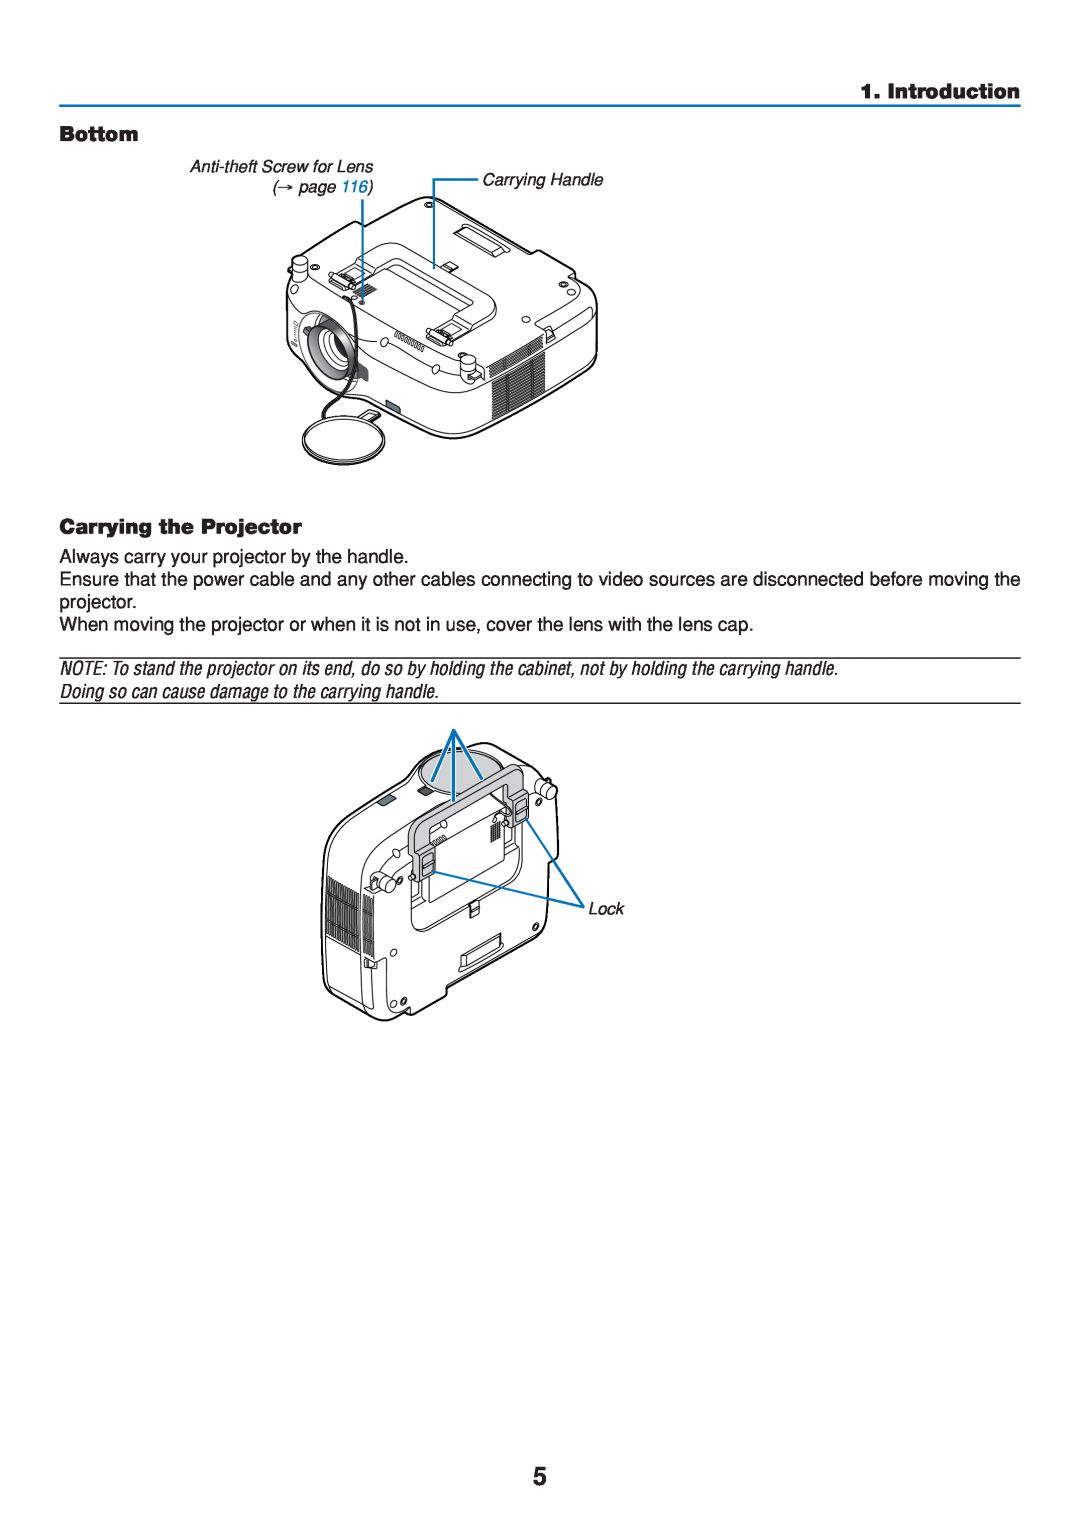 Dukane 8808 user manual Bottom, Carrying the Projector, Introduction, Always carry your projector by the handle 